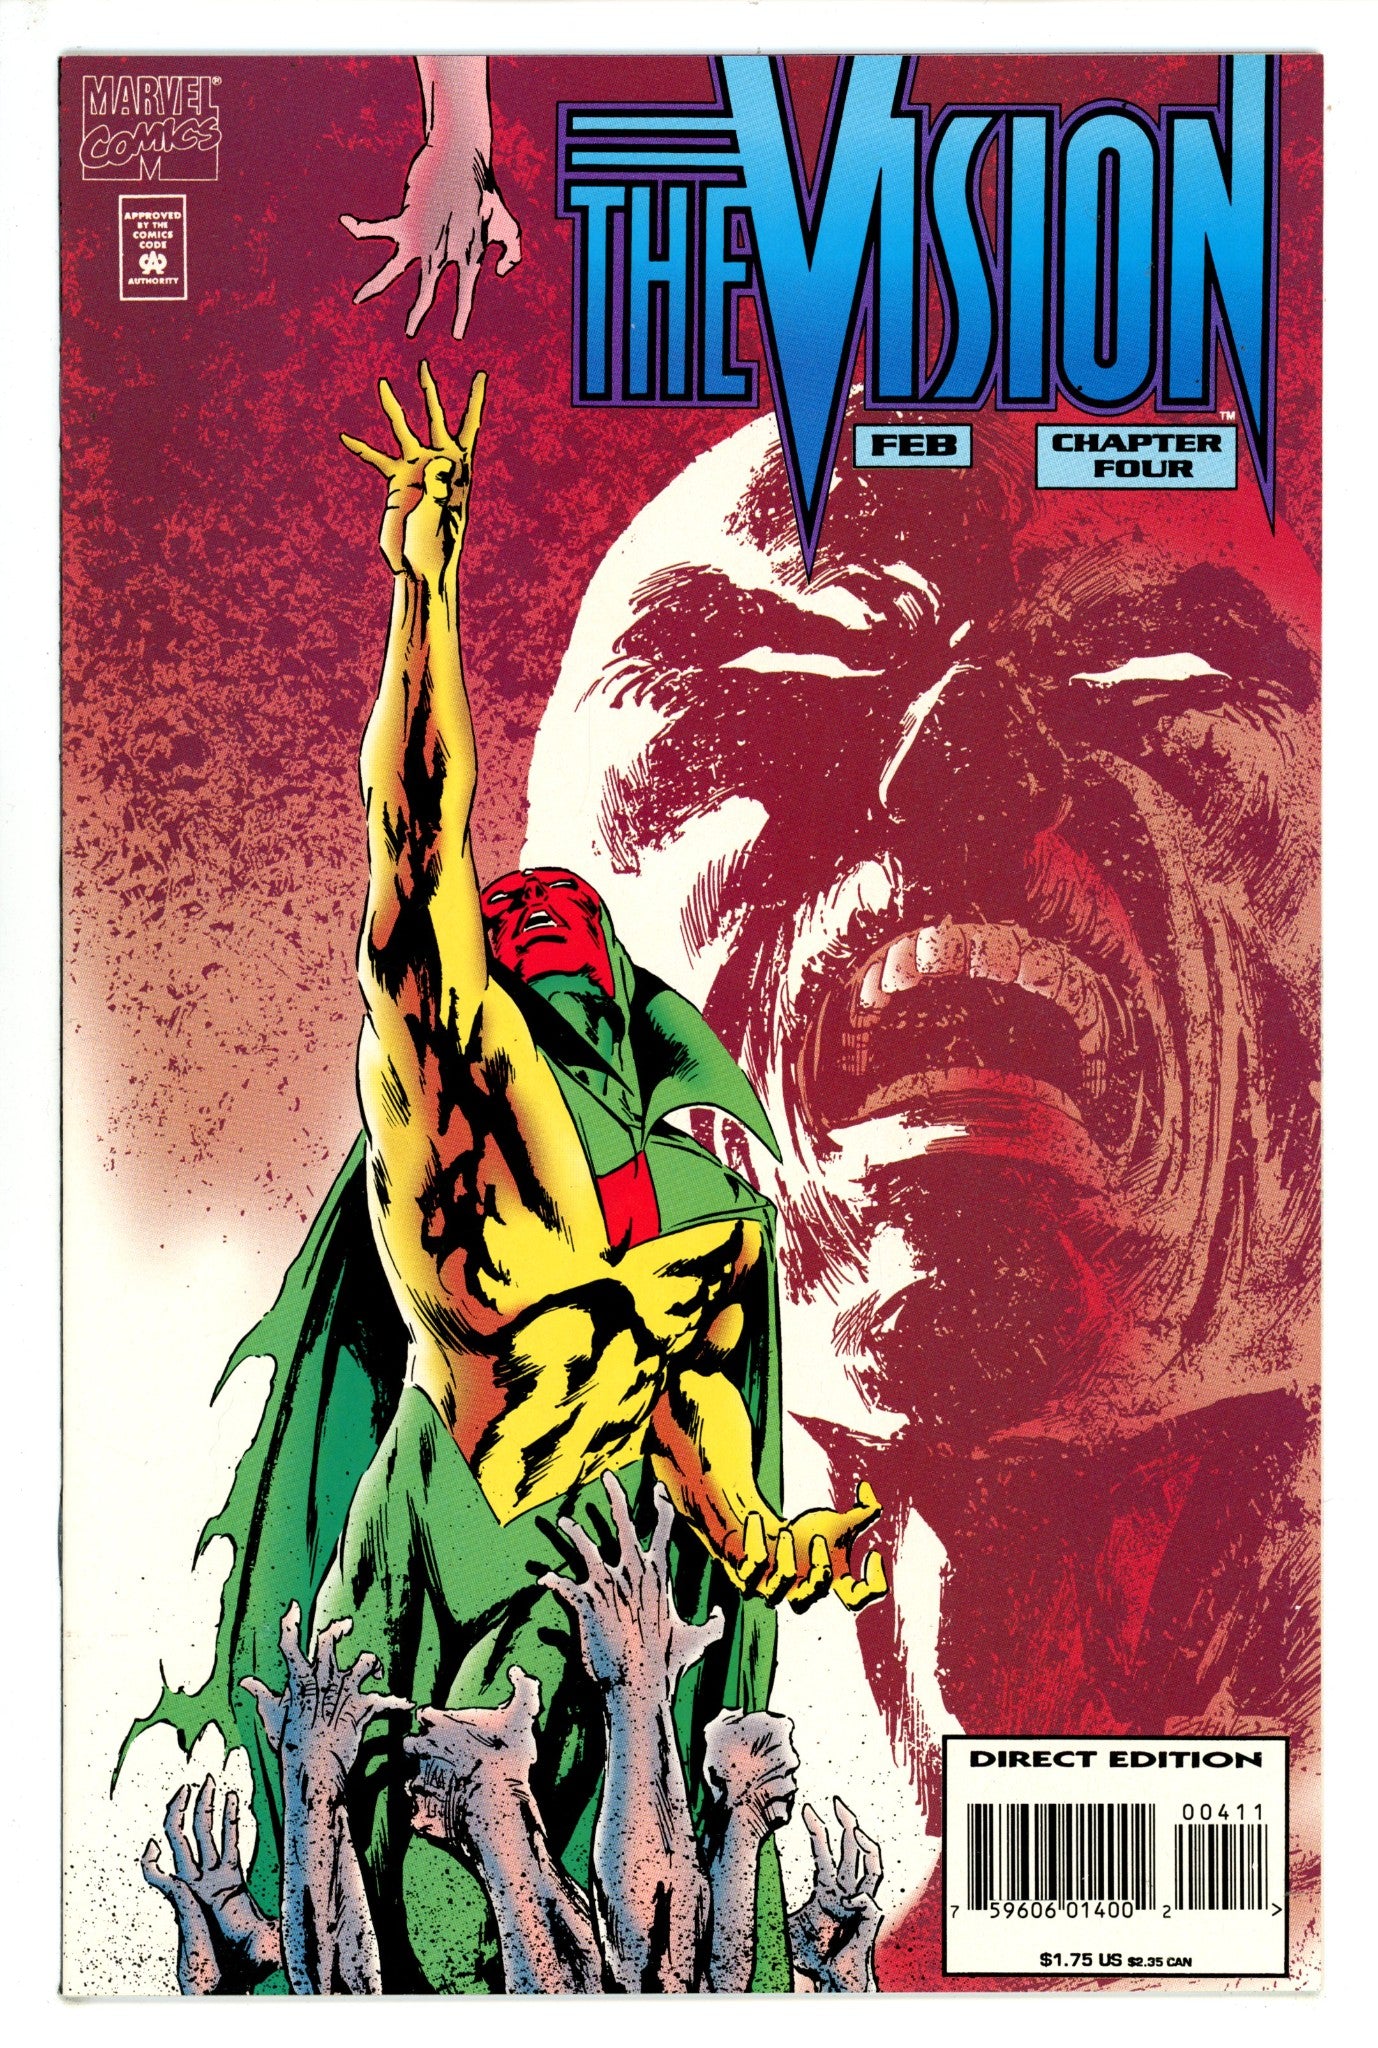 The Vision Vol 1 4 (1995)